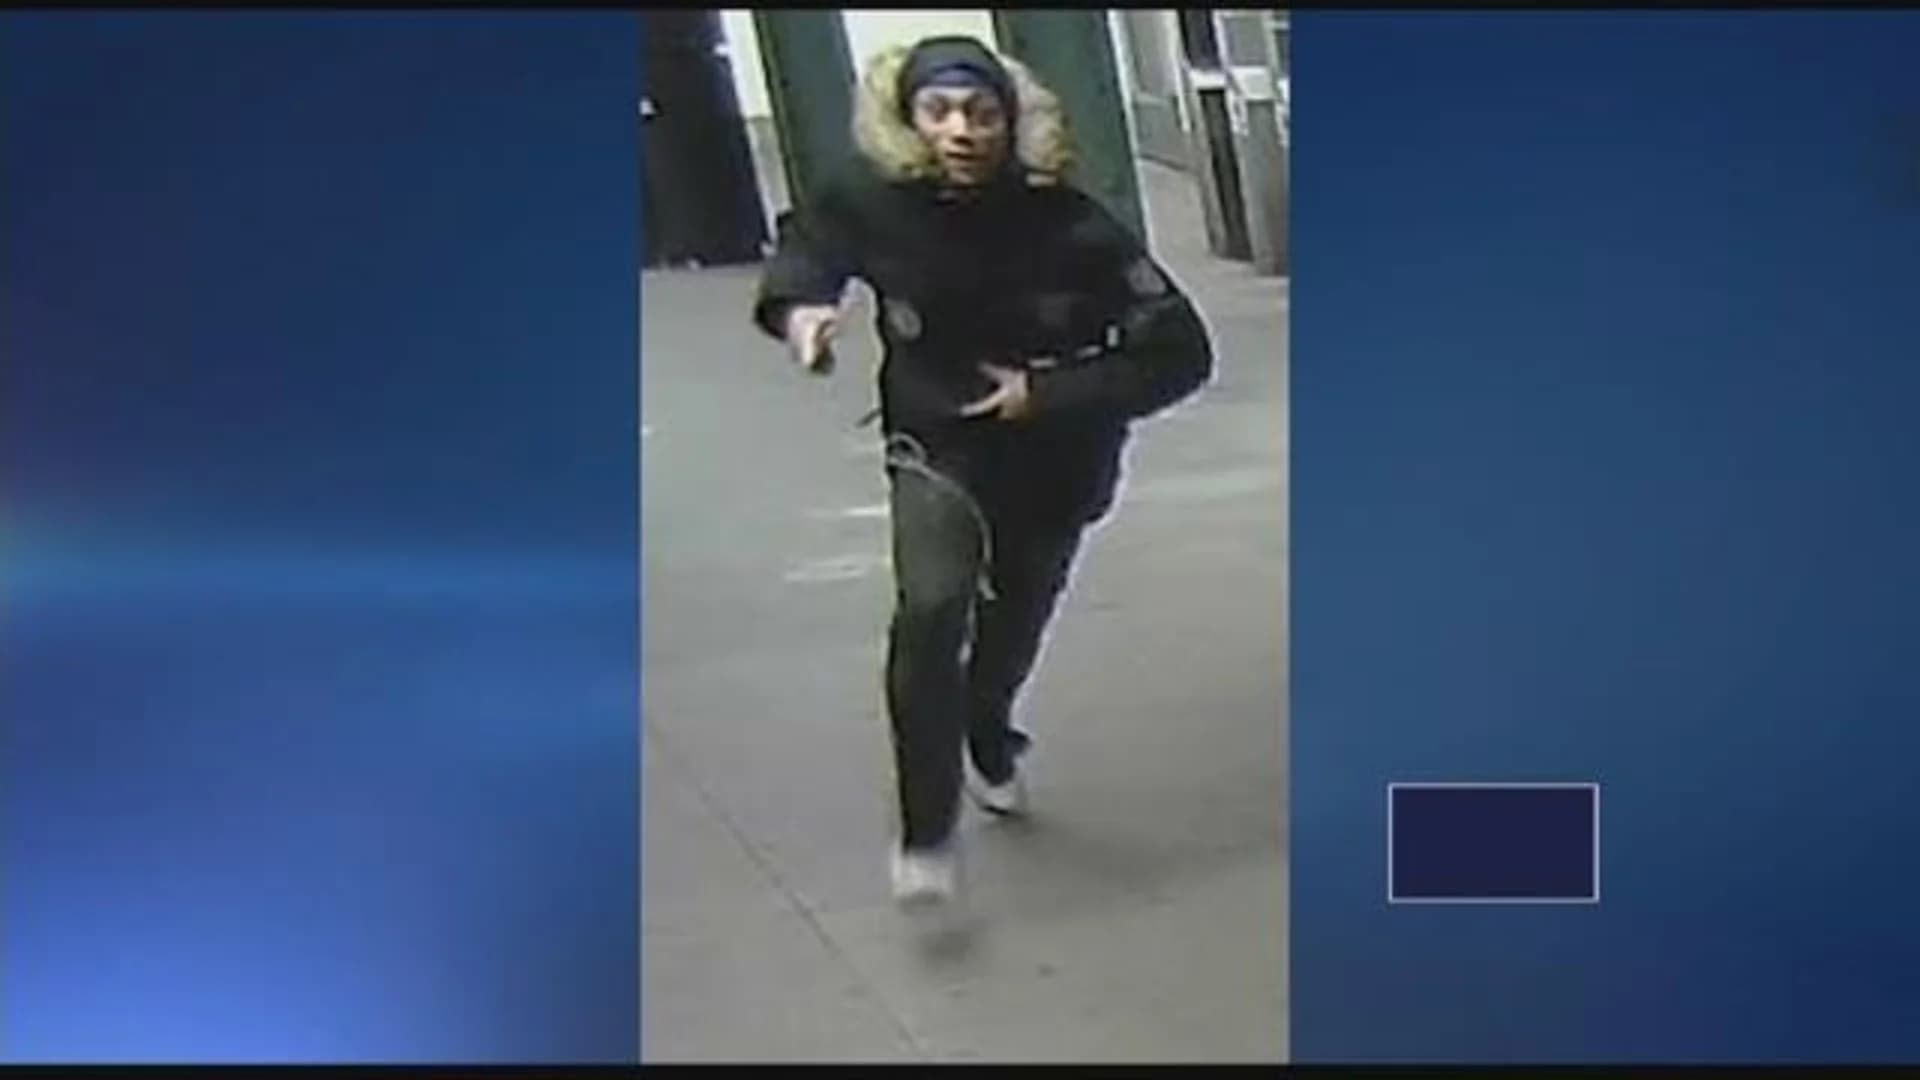 Police: Man wanted in cellphone robbery at subway station